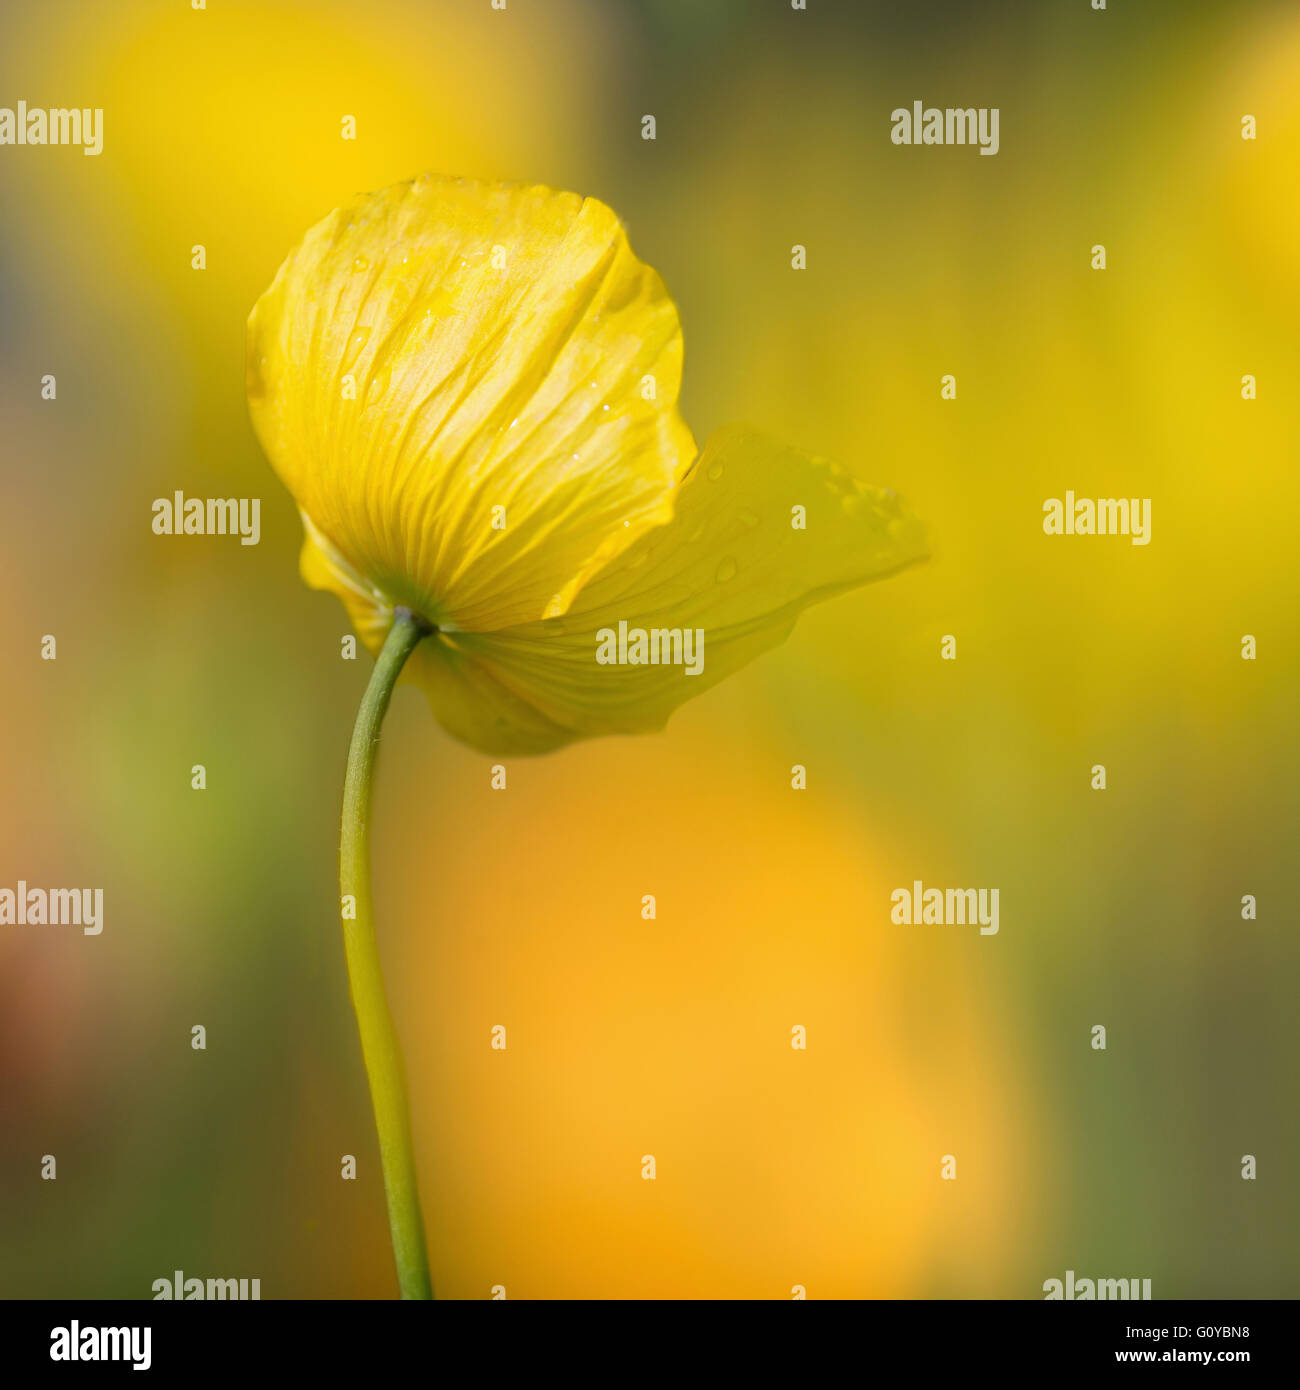 Poppy, Welsh poppy, Meconopsis, Meconopsis cambrica, Beauty in Nature, Colour, Contemporary, Cottage garden plant, Creative, Delicate, Dreamlike, Flower, Autumn Flowering, Spring Flowering, Summer Flowering, Frost hardy, Growing, Outdoor, Perennial, Plant, West Europe indigenous, Wild flower, Yellow, Stock Photo